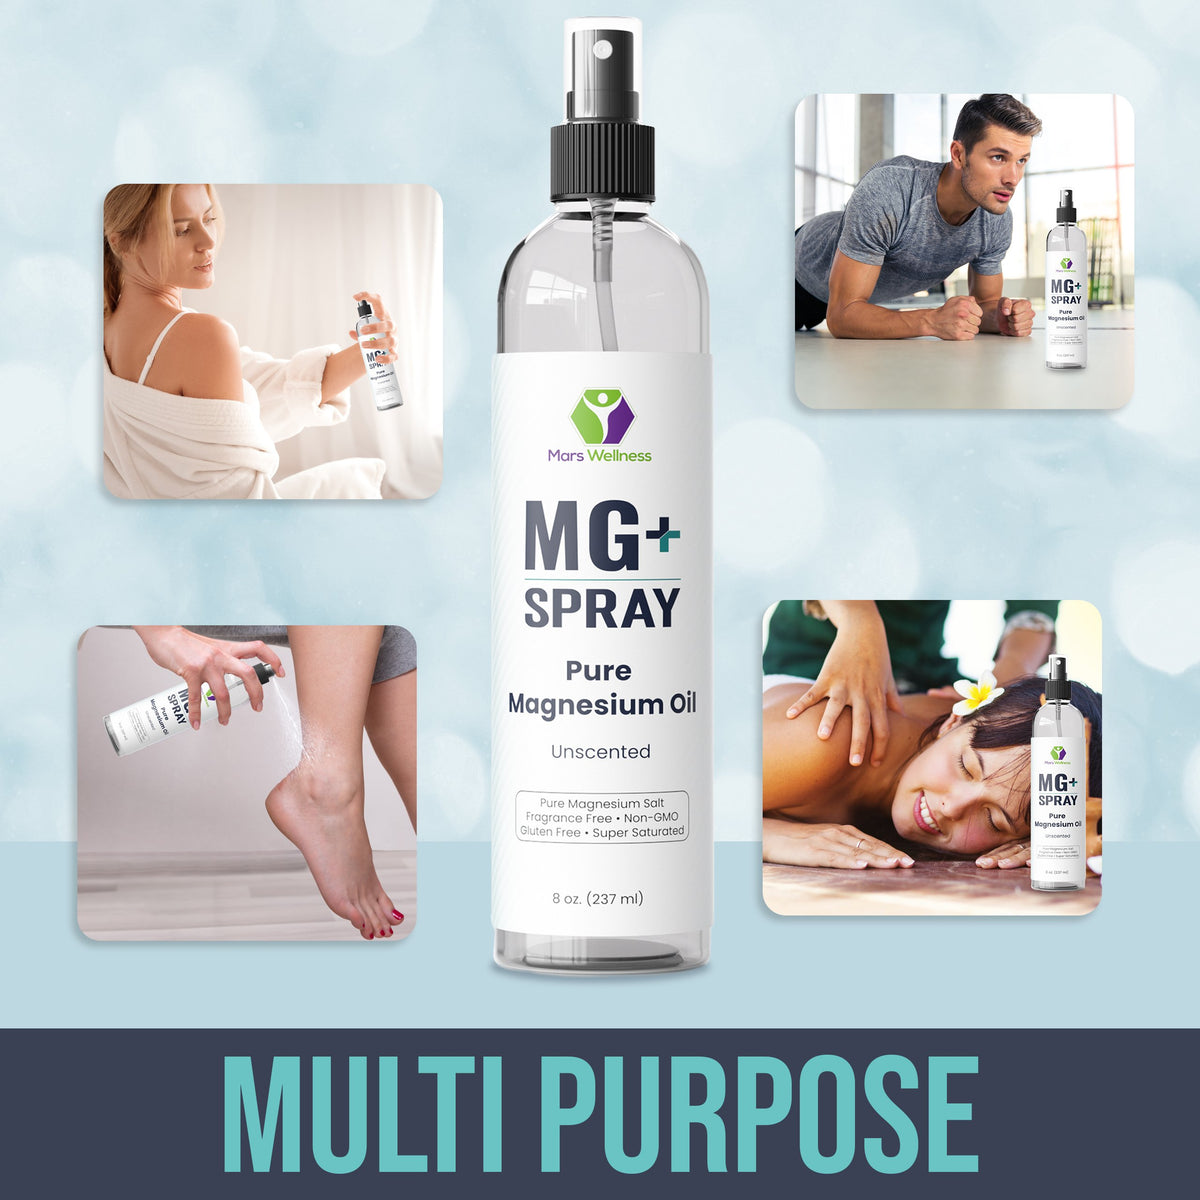 Mars Wellness MG+ Pure Magnesium Oil Spray - 8 Ounce High Quality Topical Magnesium Spray for Relaxing and Rejuvenating Muscles, Made in USA - Magnesium Spay